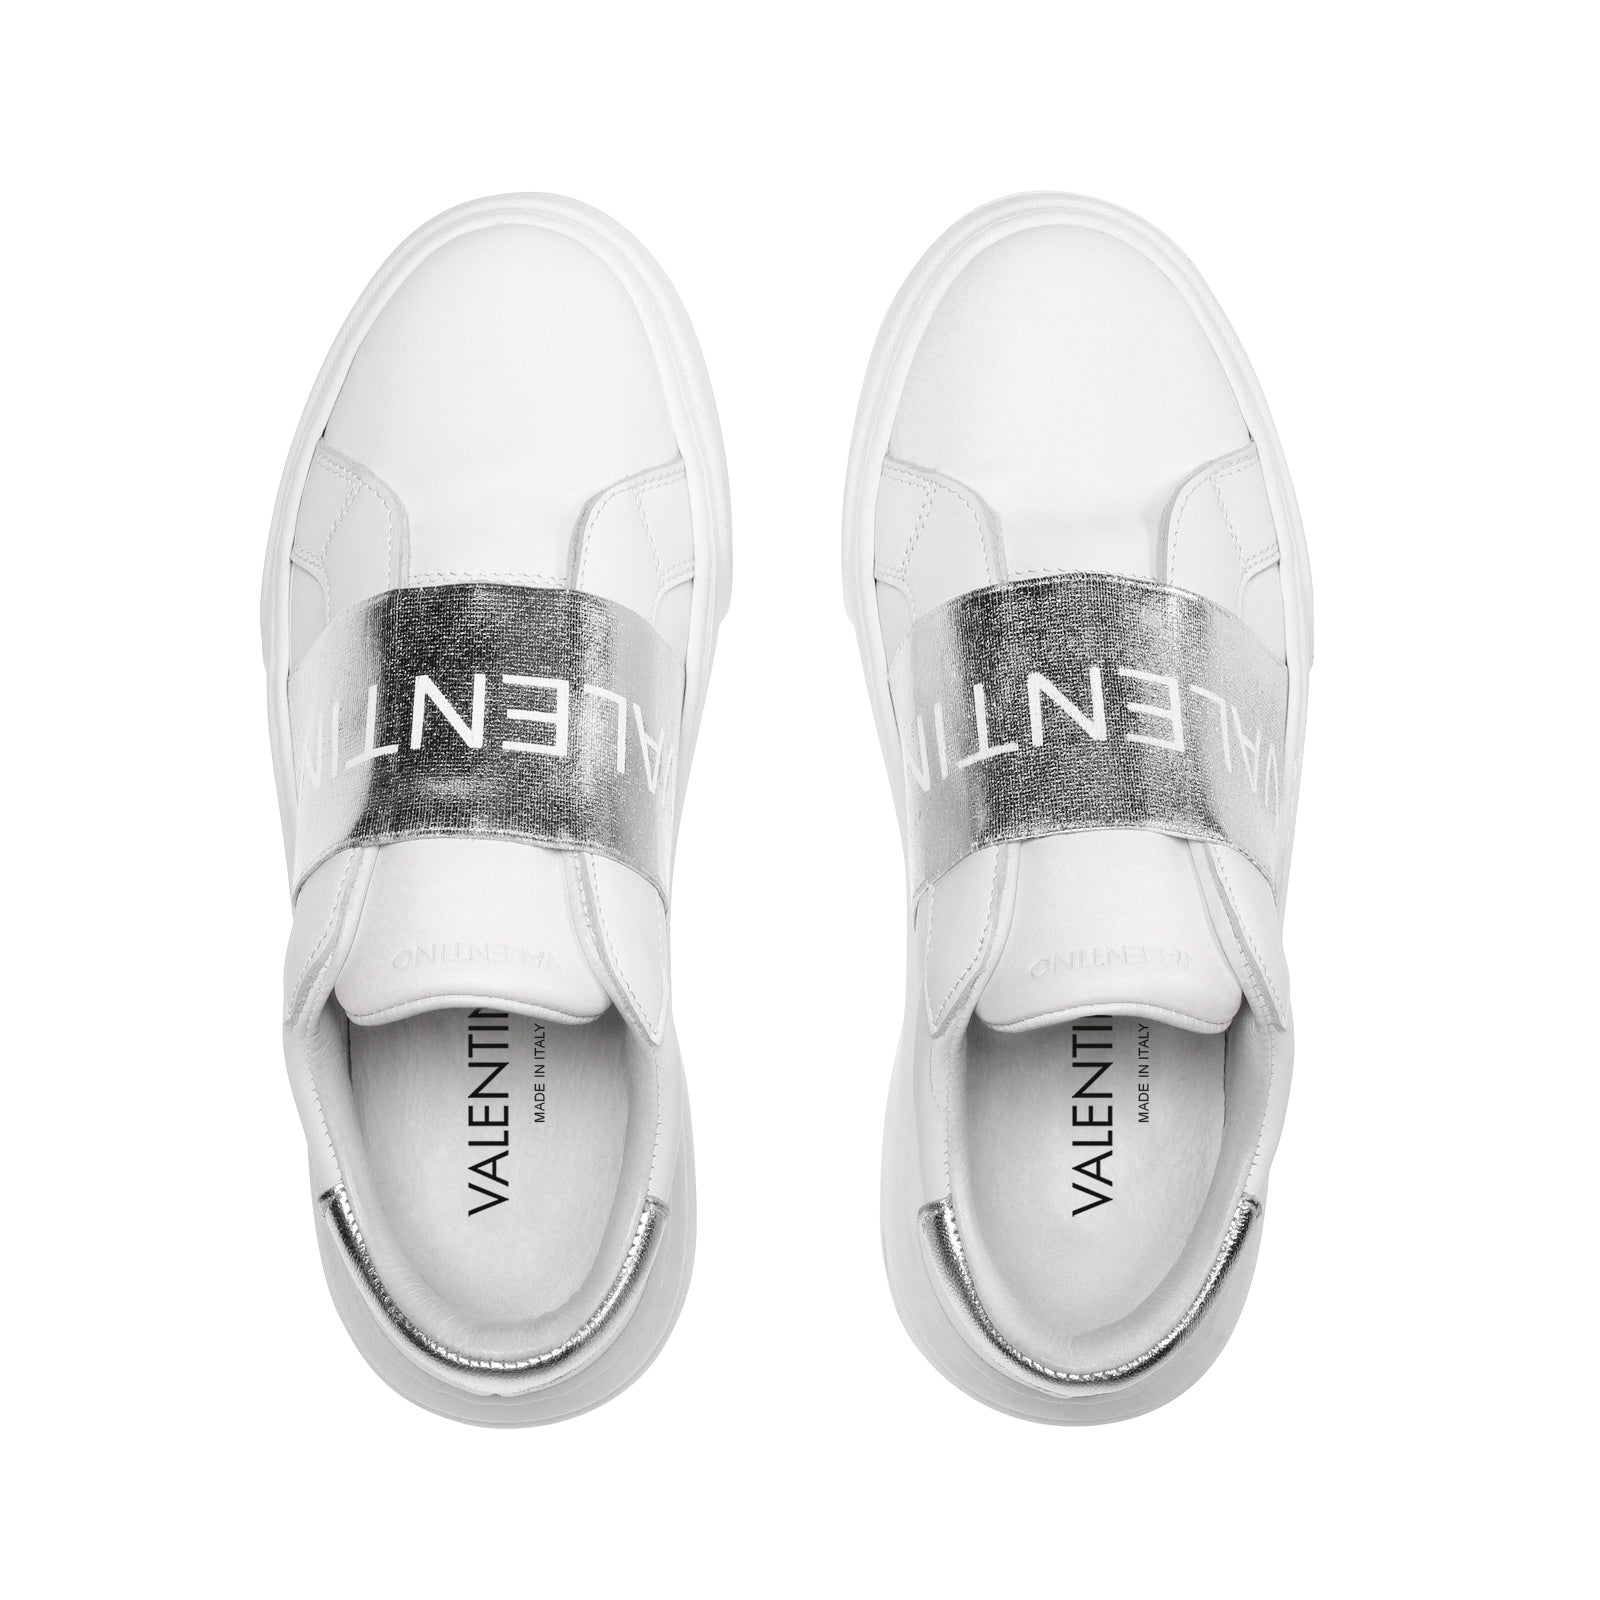 Ud Aflede sensor Valentino Sneakers Slip-On for Women in White Calf and Silver Detail –  Valentino Shoes UAE